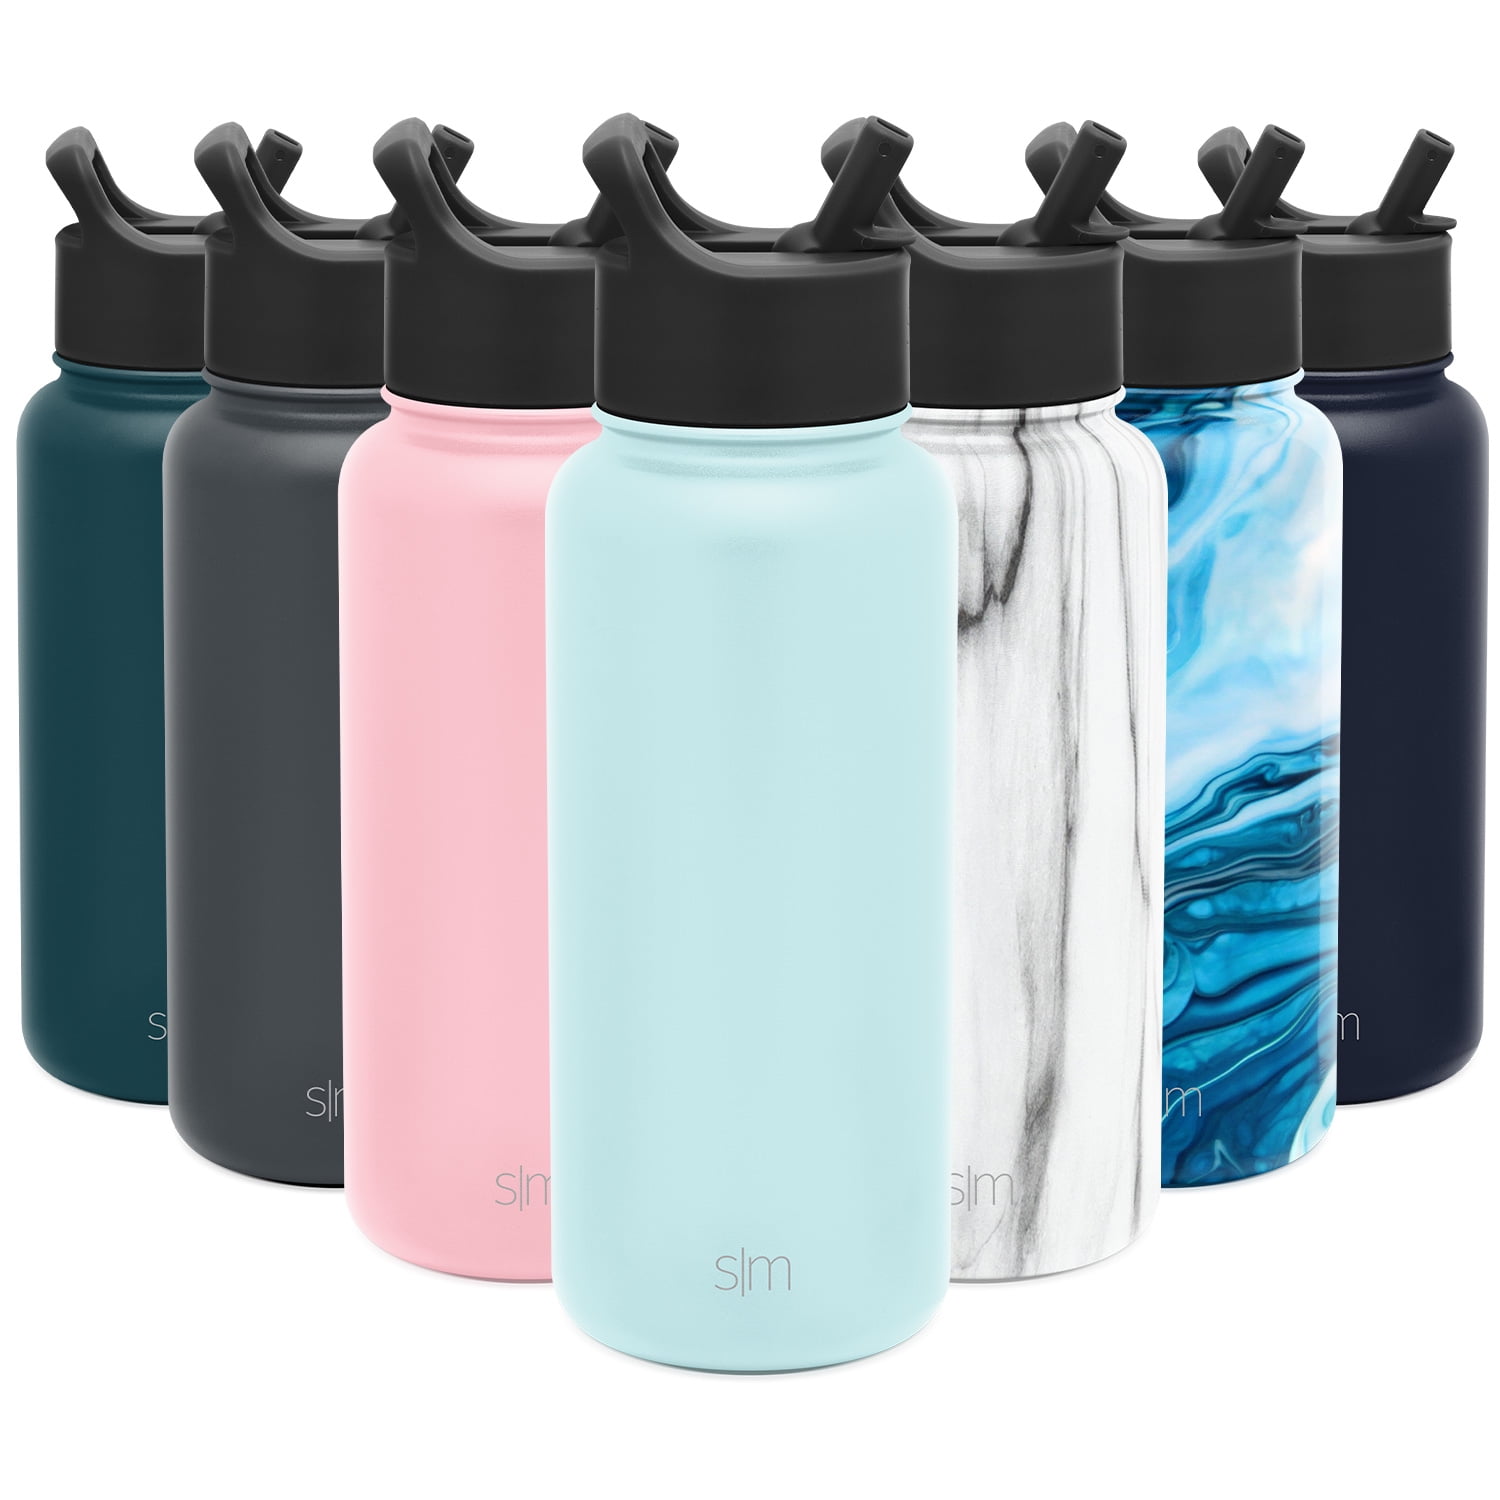 Vacuum Insulated 18/8 Stainless Steel Travel Mug Thermos Simple Modern Collegiate Water Bottles 